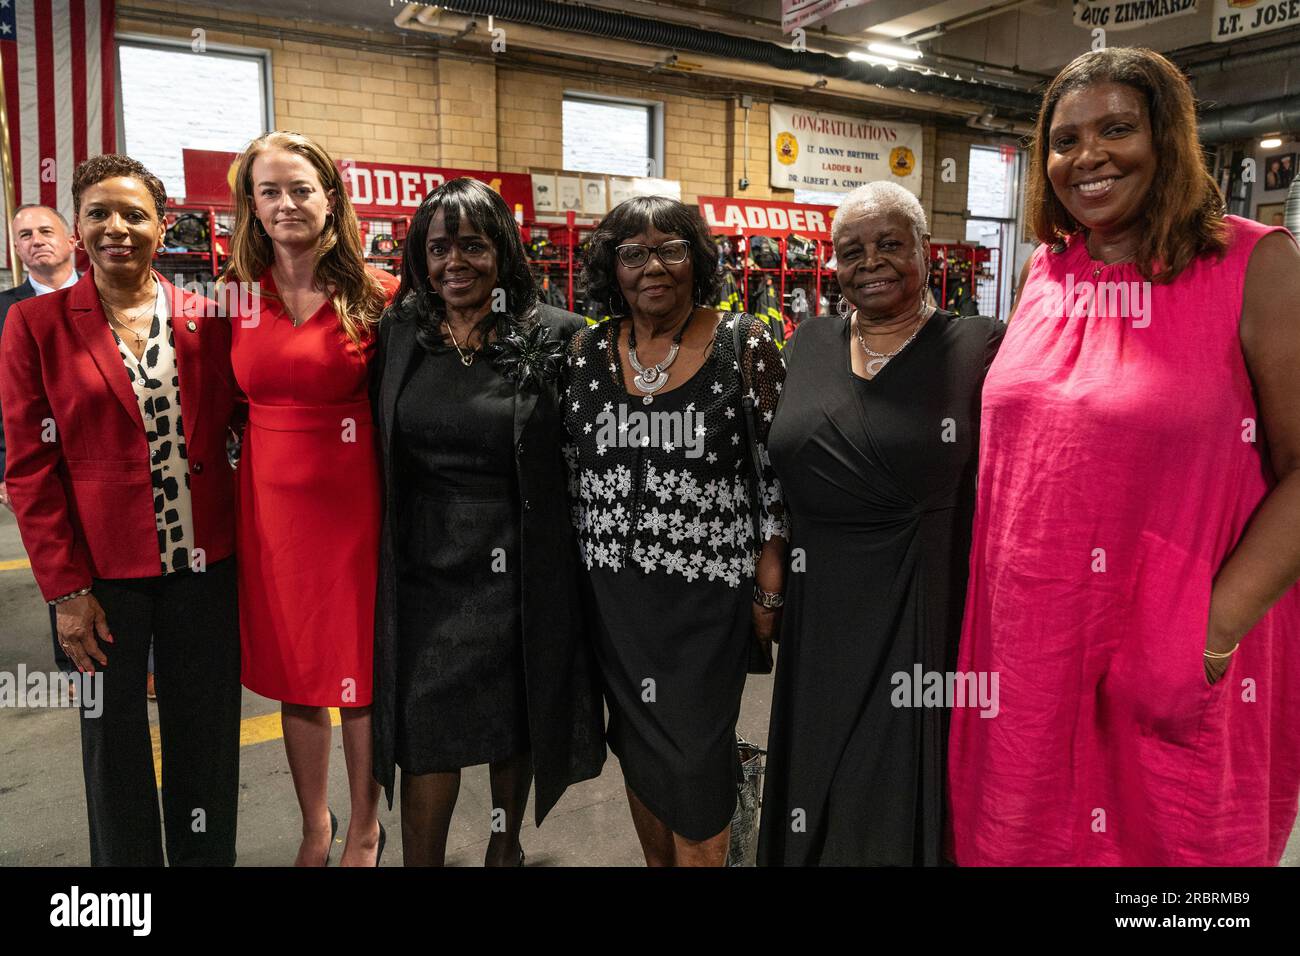 Adrienne Adams, Laura Kavanagh, Gwendolyn Webb, Gwendolyn Gamble, Gloria Washington, Letitia James attend press conference on anniversary of Children's Crusade or Children's March as it is known at FDNY Engine 1, Ladder 24 station in New York on July 10, 2023 Stock Photo